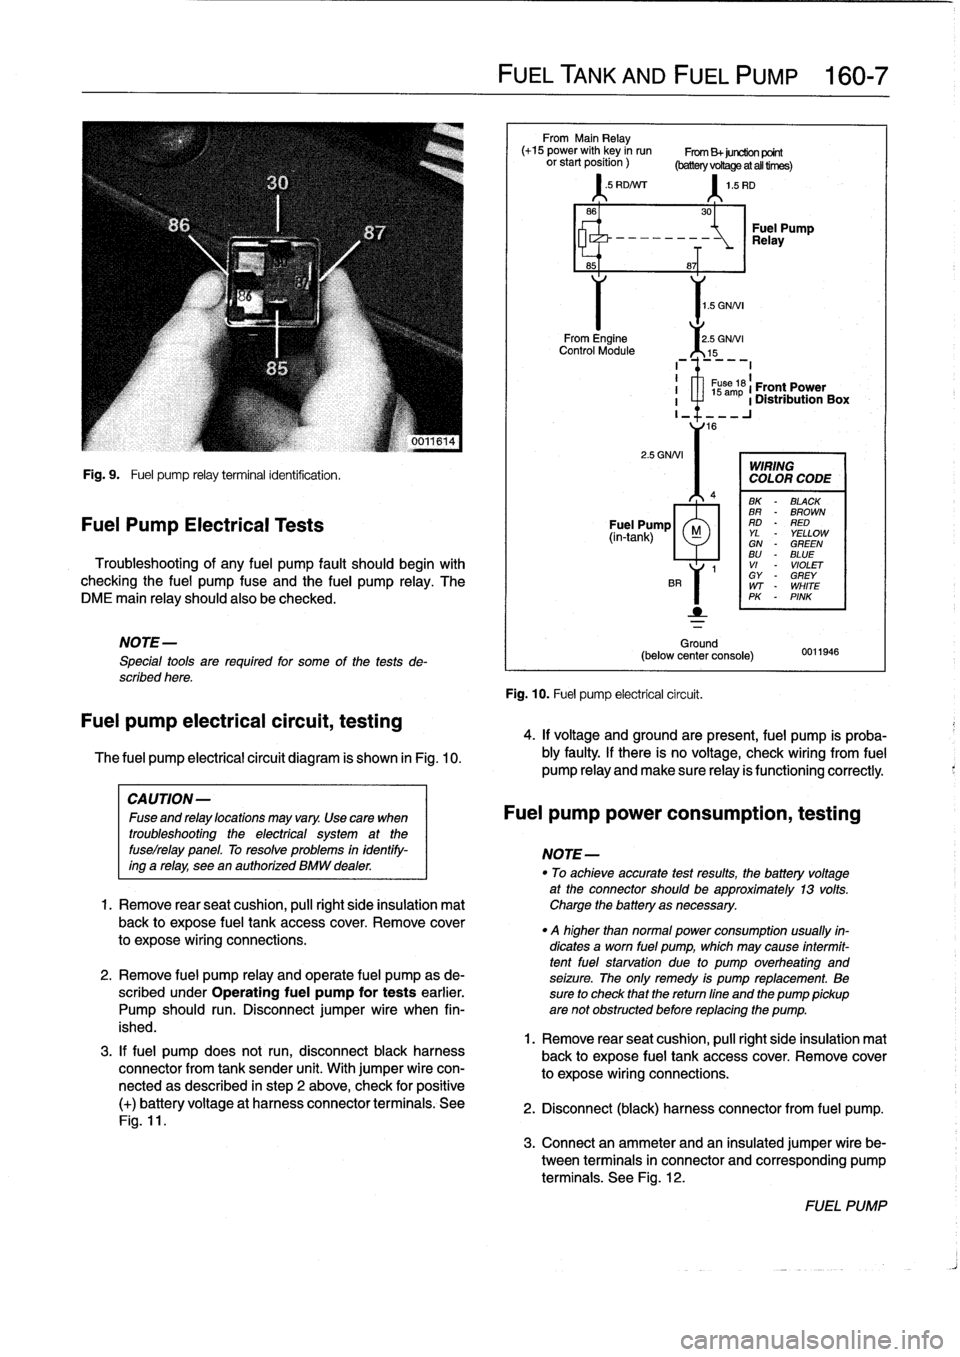 BMW 328i 1992 E36 Workshop Manual 
Fig
.
9
.

	

Fuel
pump
relay
terminal
identification
.

Fuel
Pump
Electrical
Tests

Troubleshooting
of
any
fuel
pump
fault
should
begin
with

checking
the
fuel
pump
fuse
and
the
fuel
pump
relay
.
Th